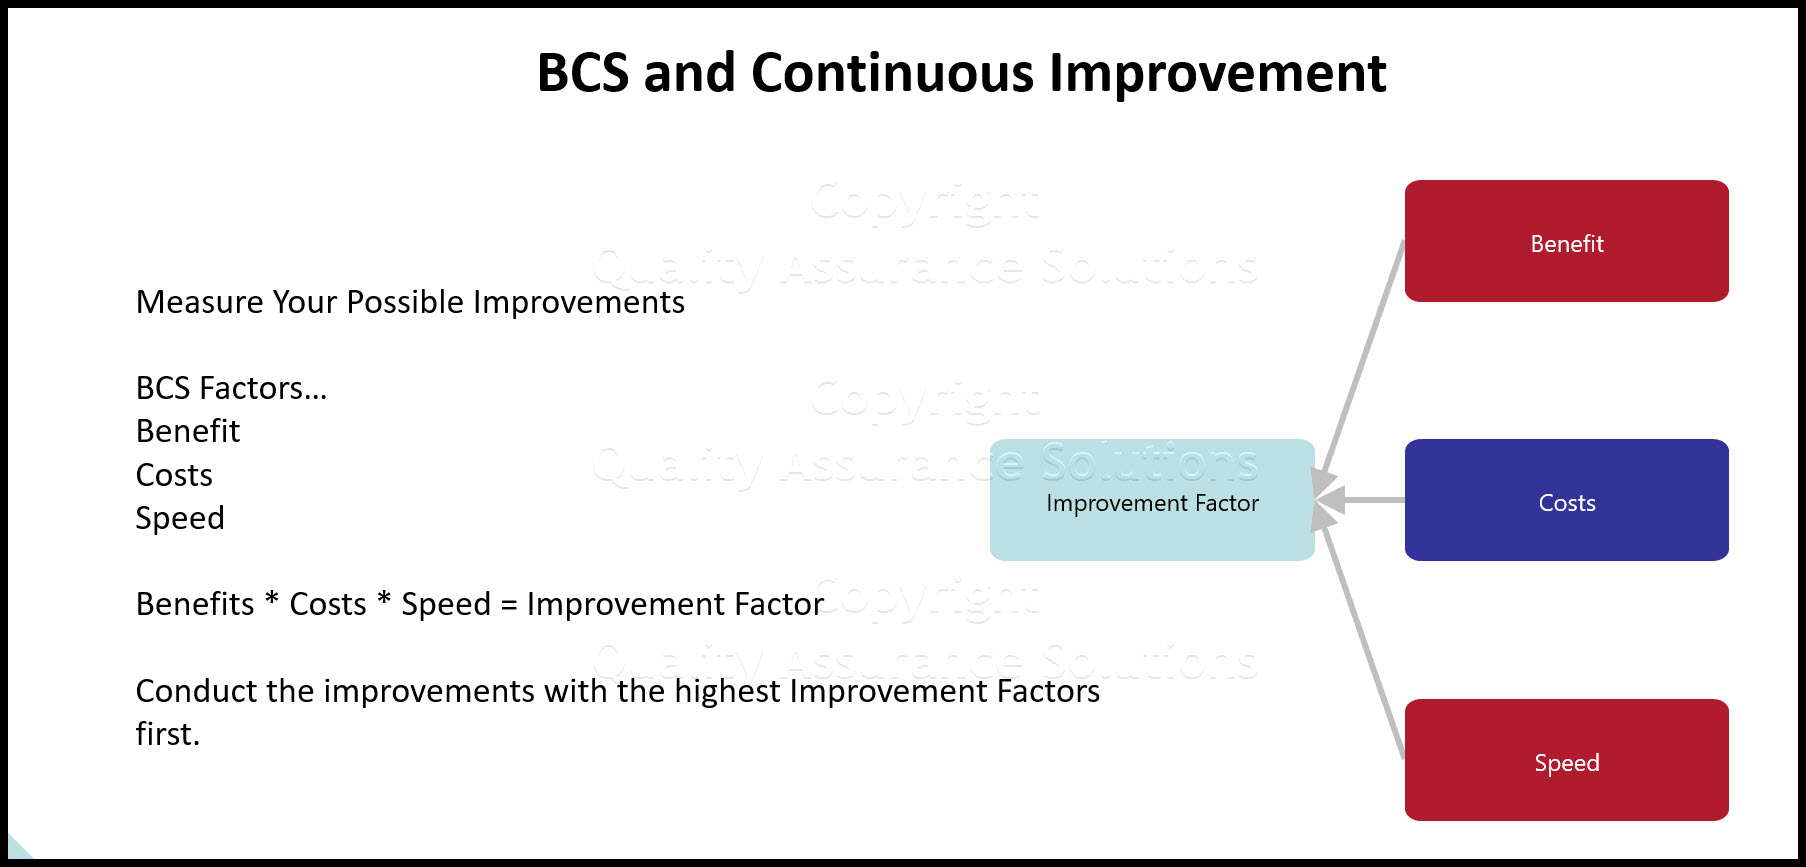 Learn how to create continuous improvement smart goals. Learn and use our BCS score method.